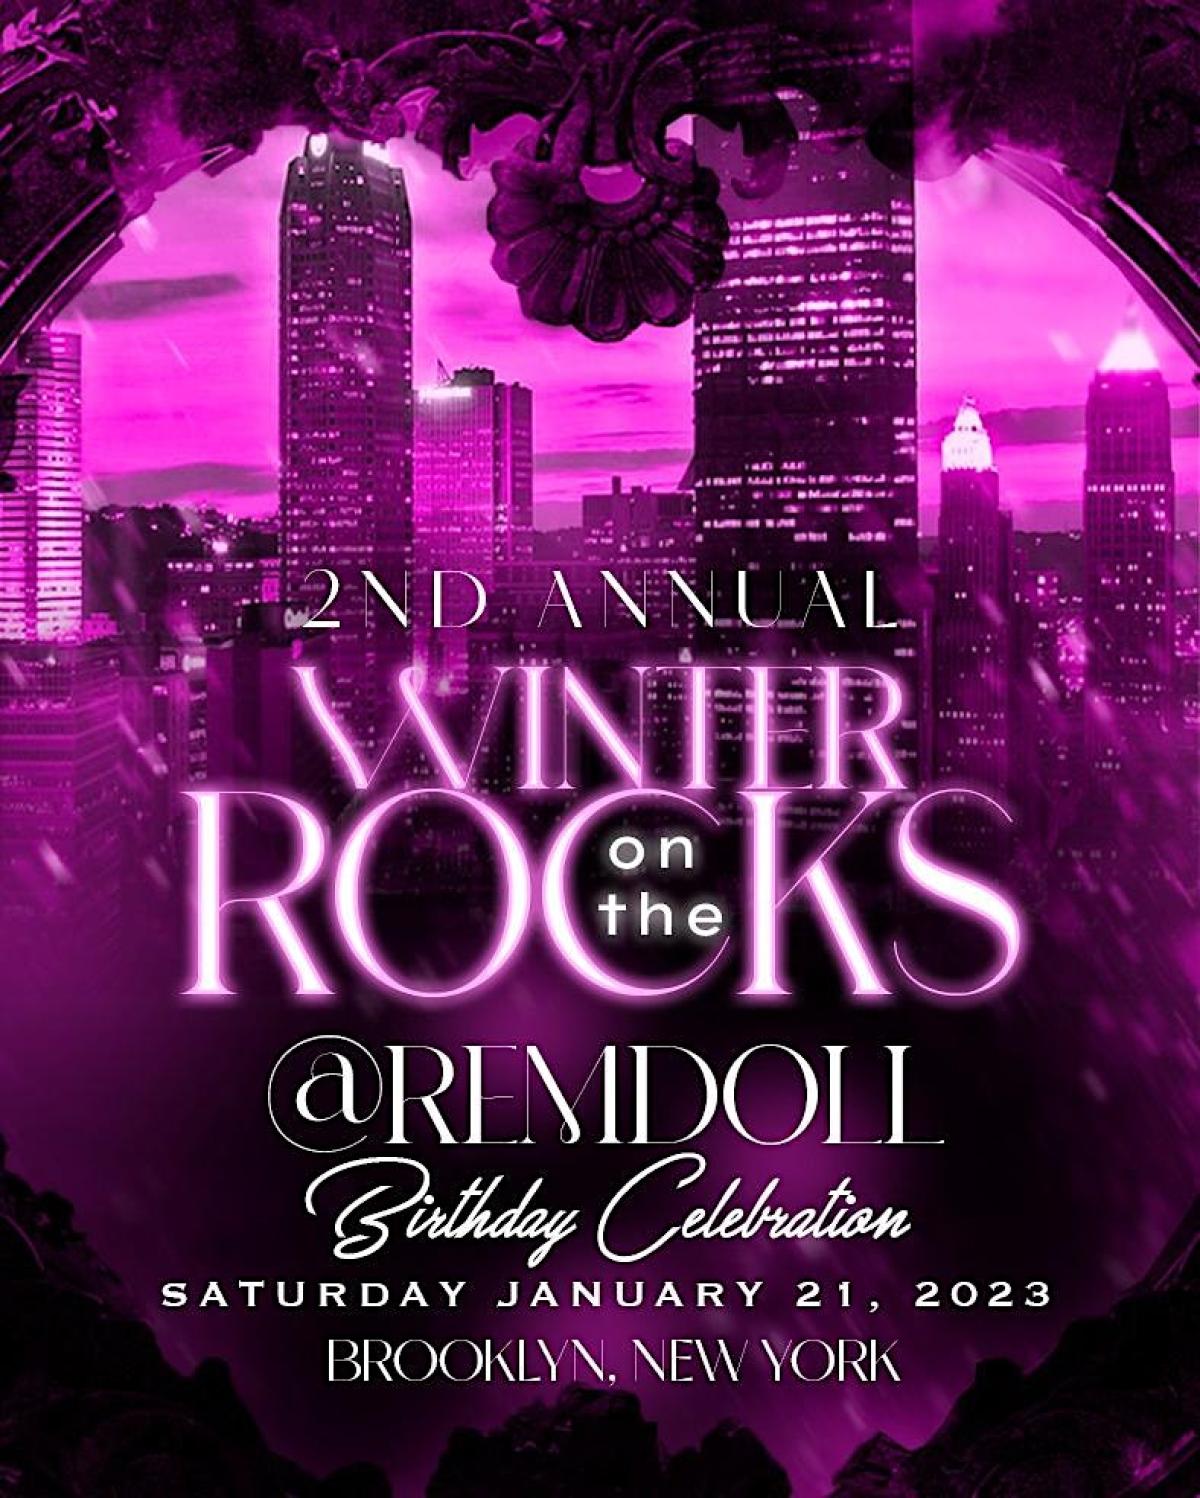 Winter On The Rocks flyer or graphic.